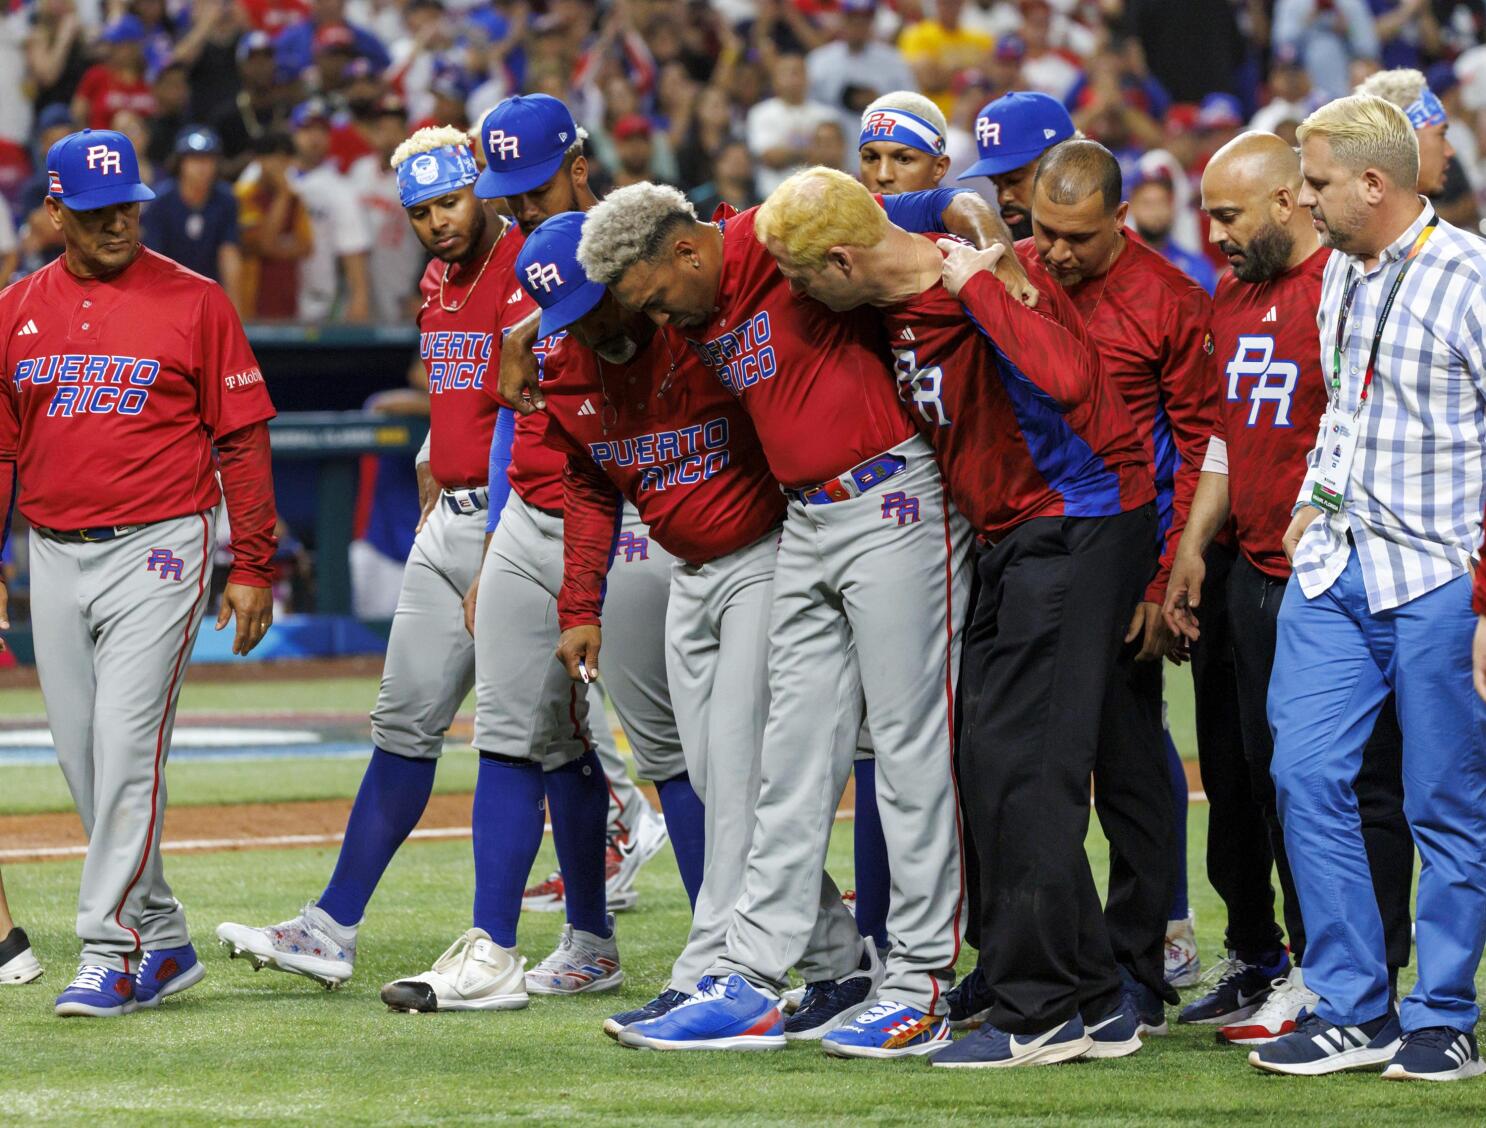 New York Mets' Edwin Diaz Has Surgery For Torn Knee Tendon Suffered In  World Baseball Classic Victory Celebration